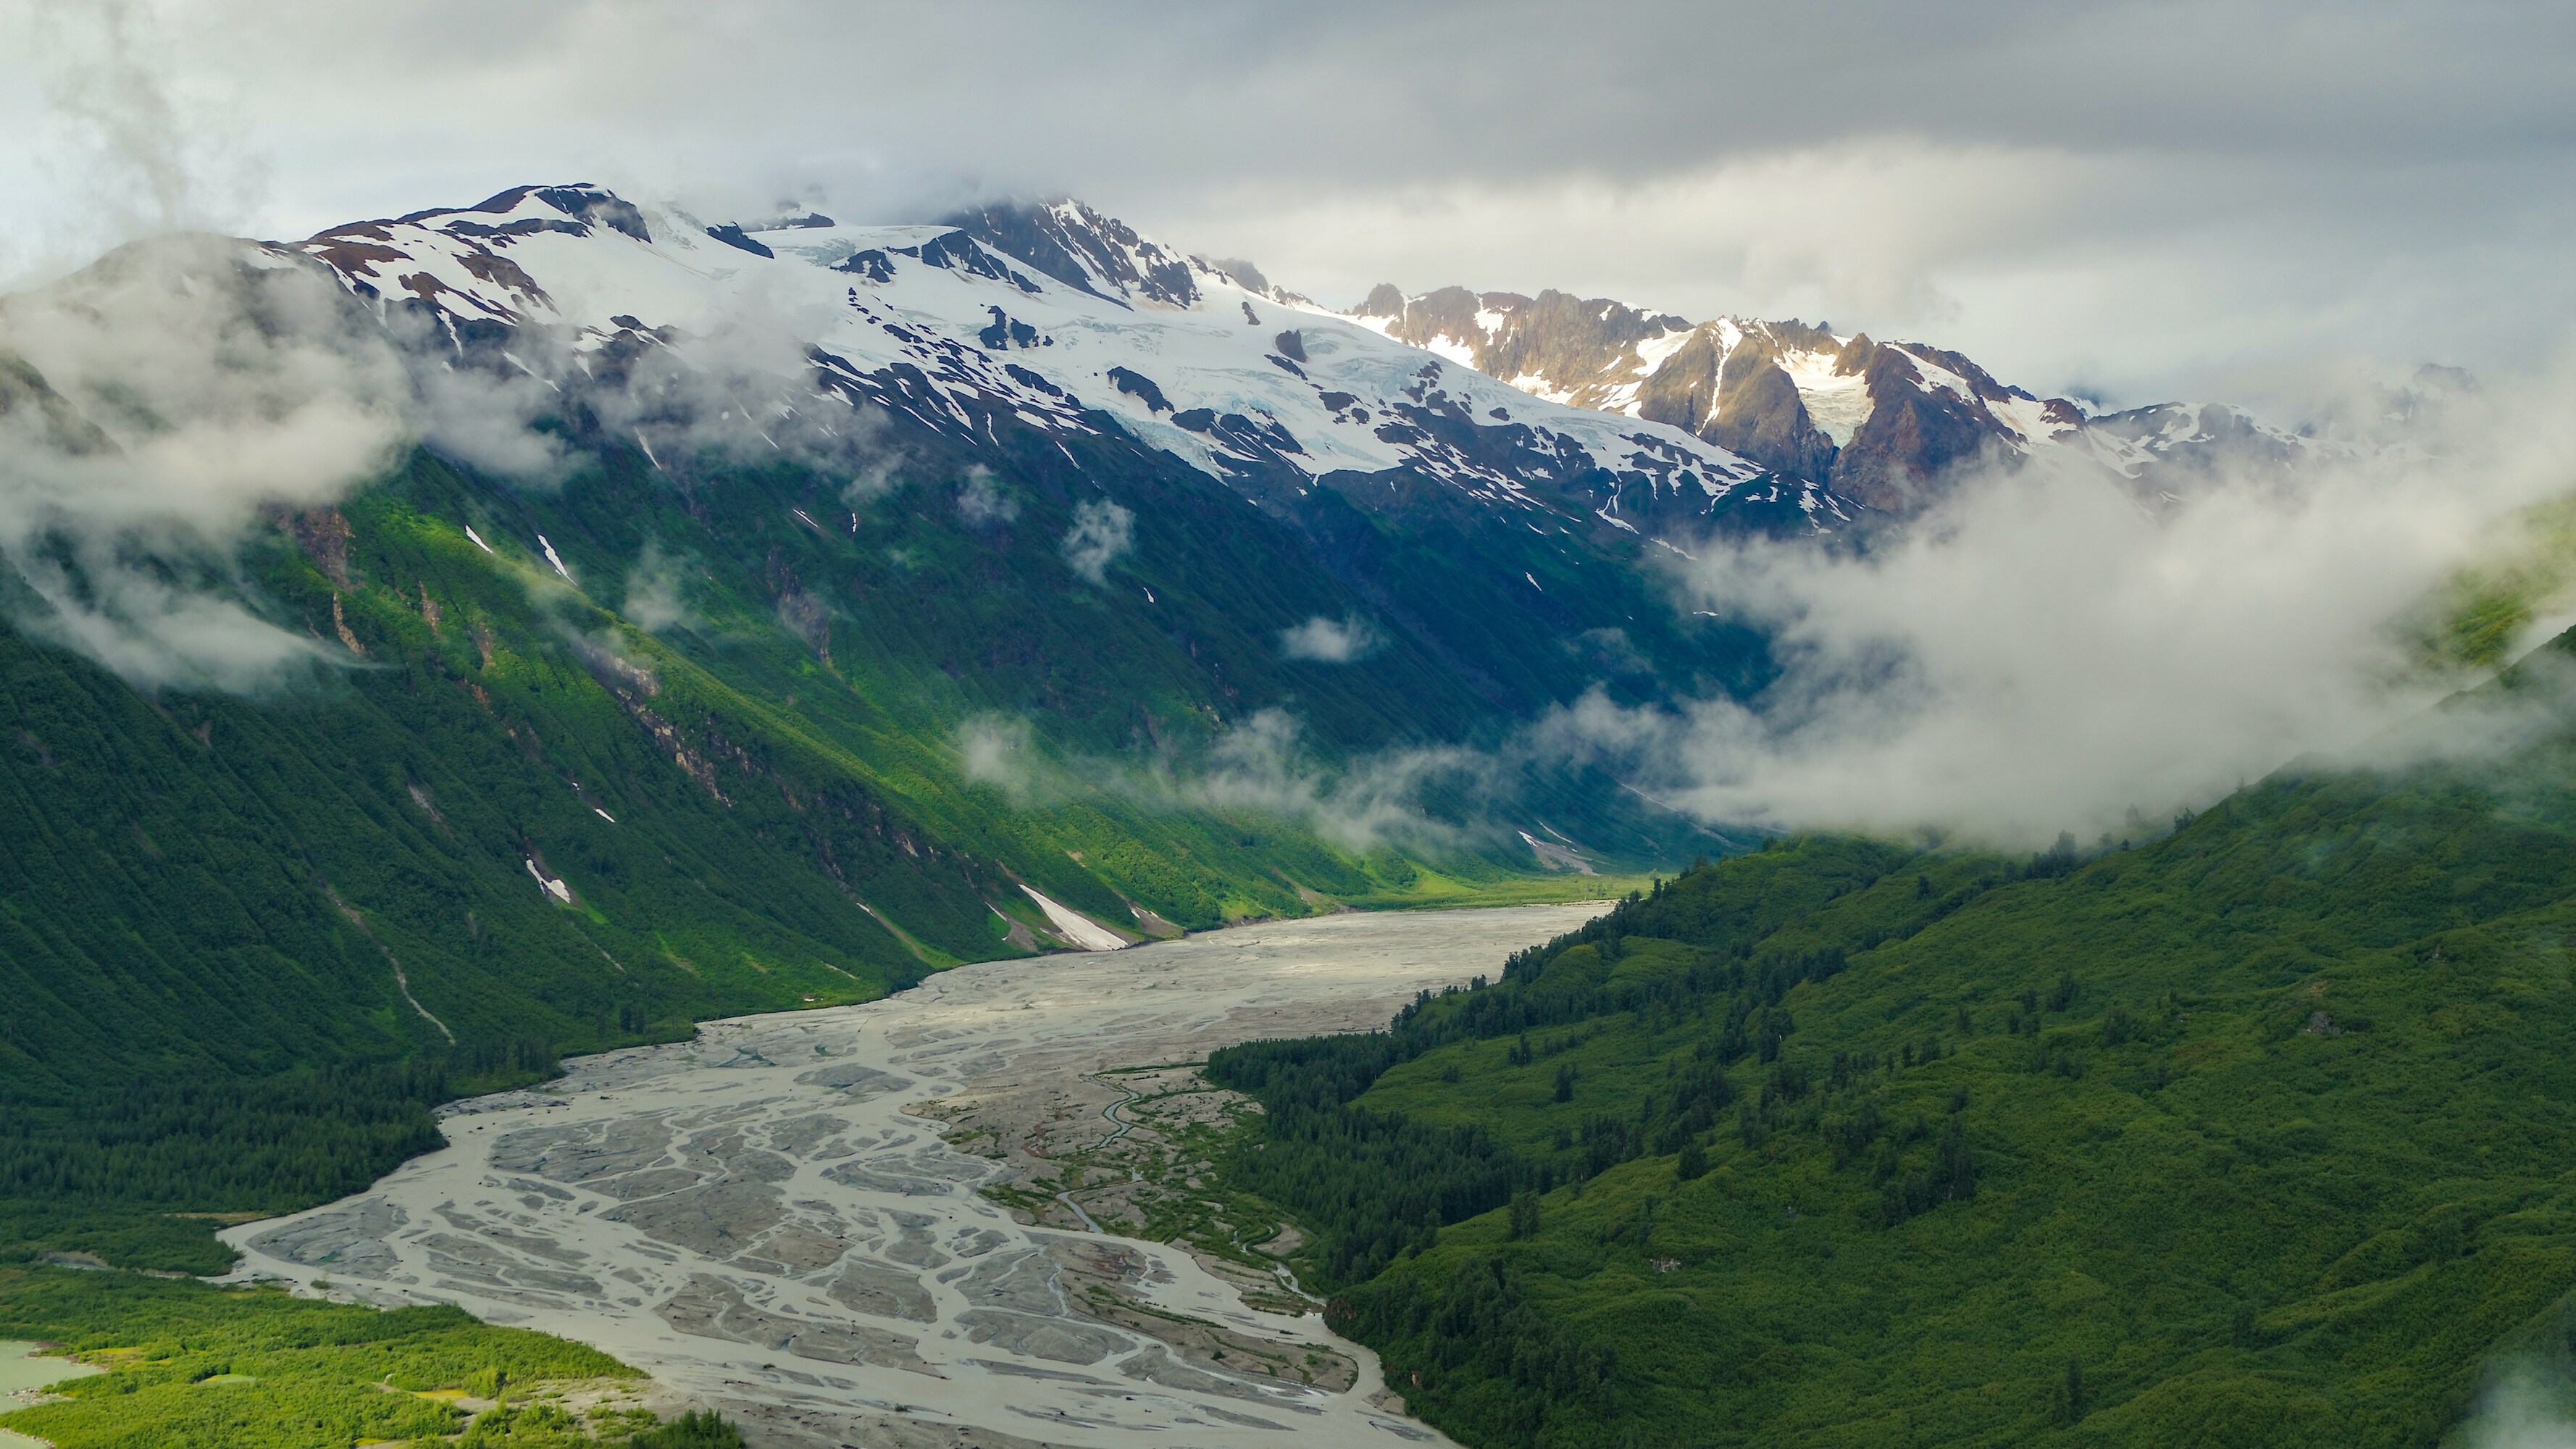 The Tsirku river, where the St Elias mountains meet the Alaskan rainforest.   (National Geographic for Disney+/Oliver Richards)